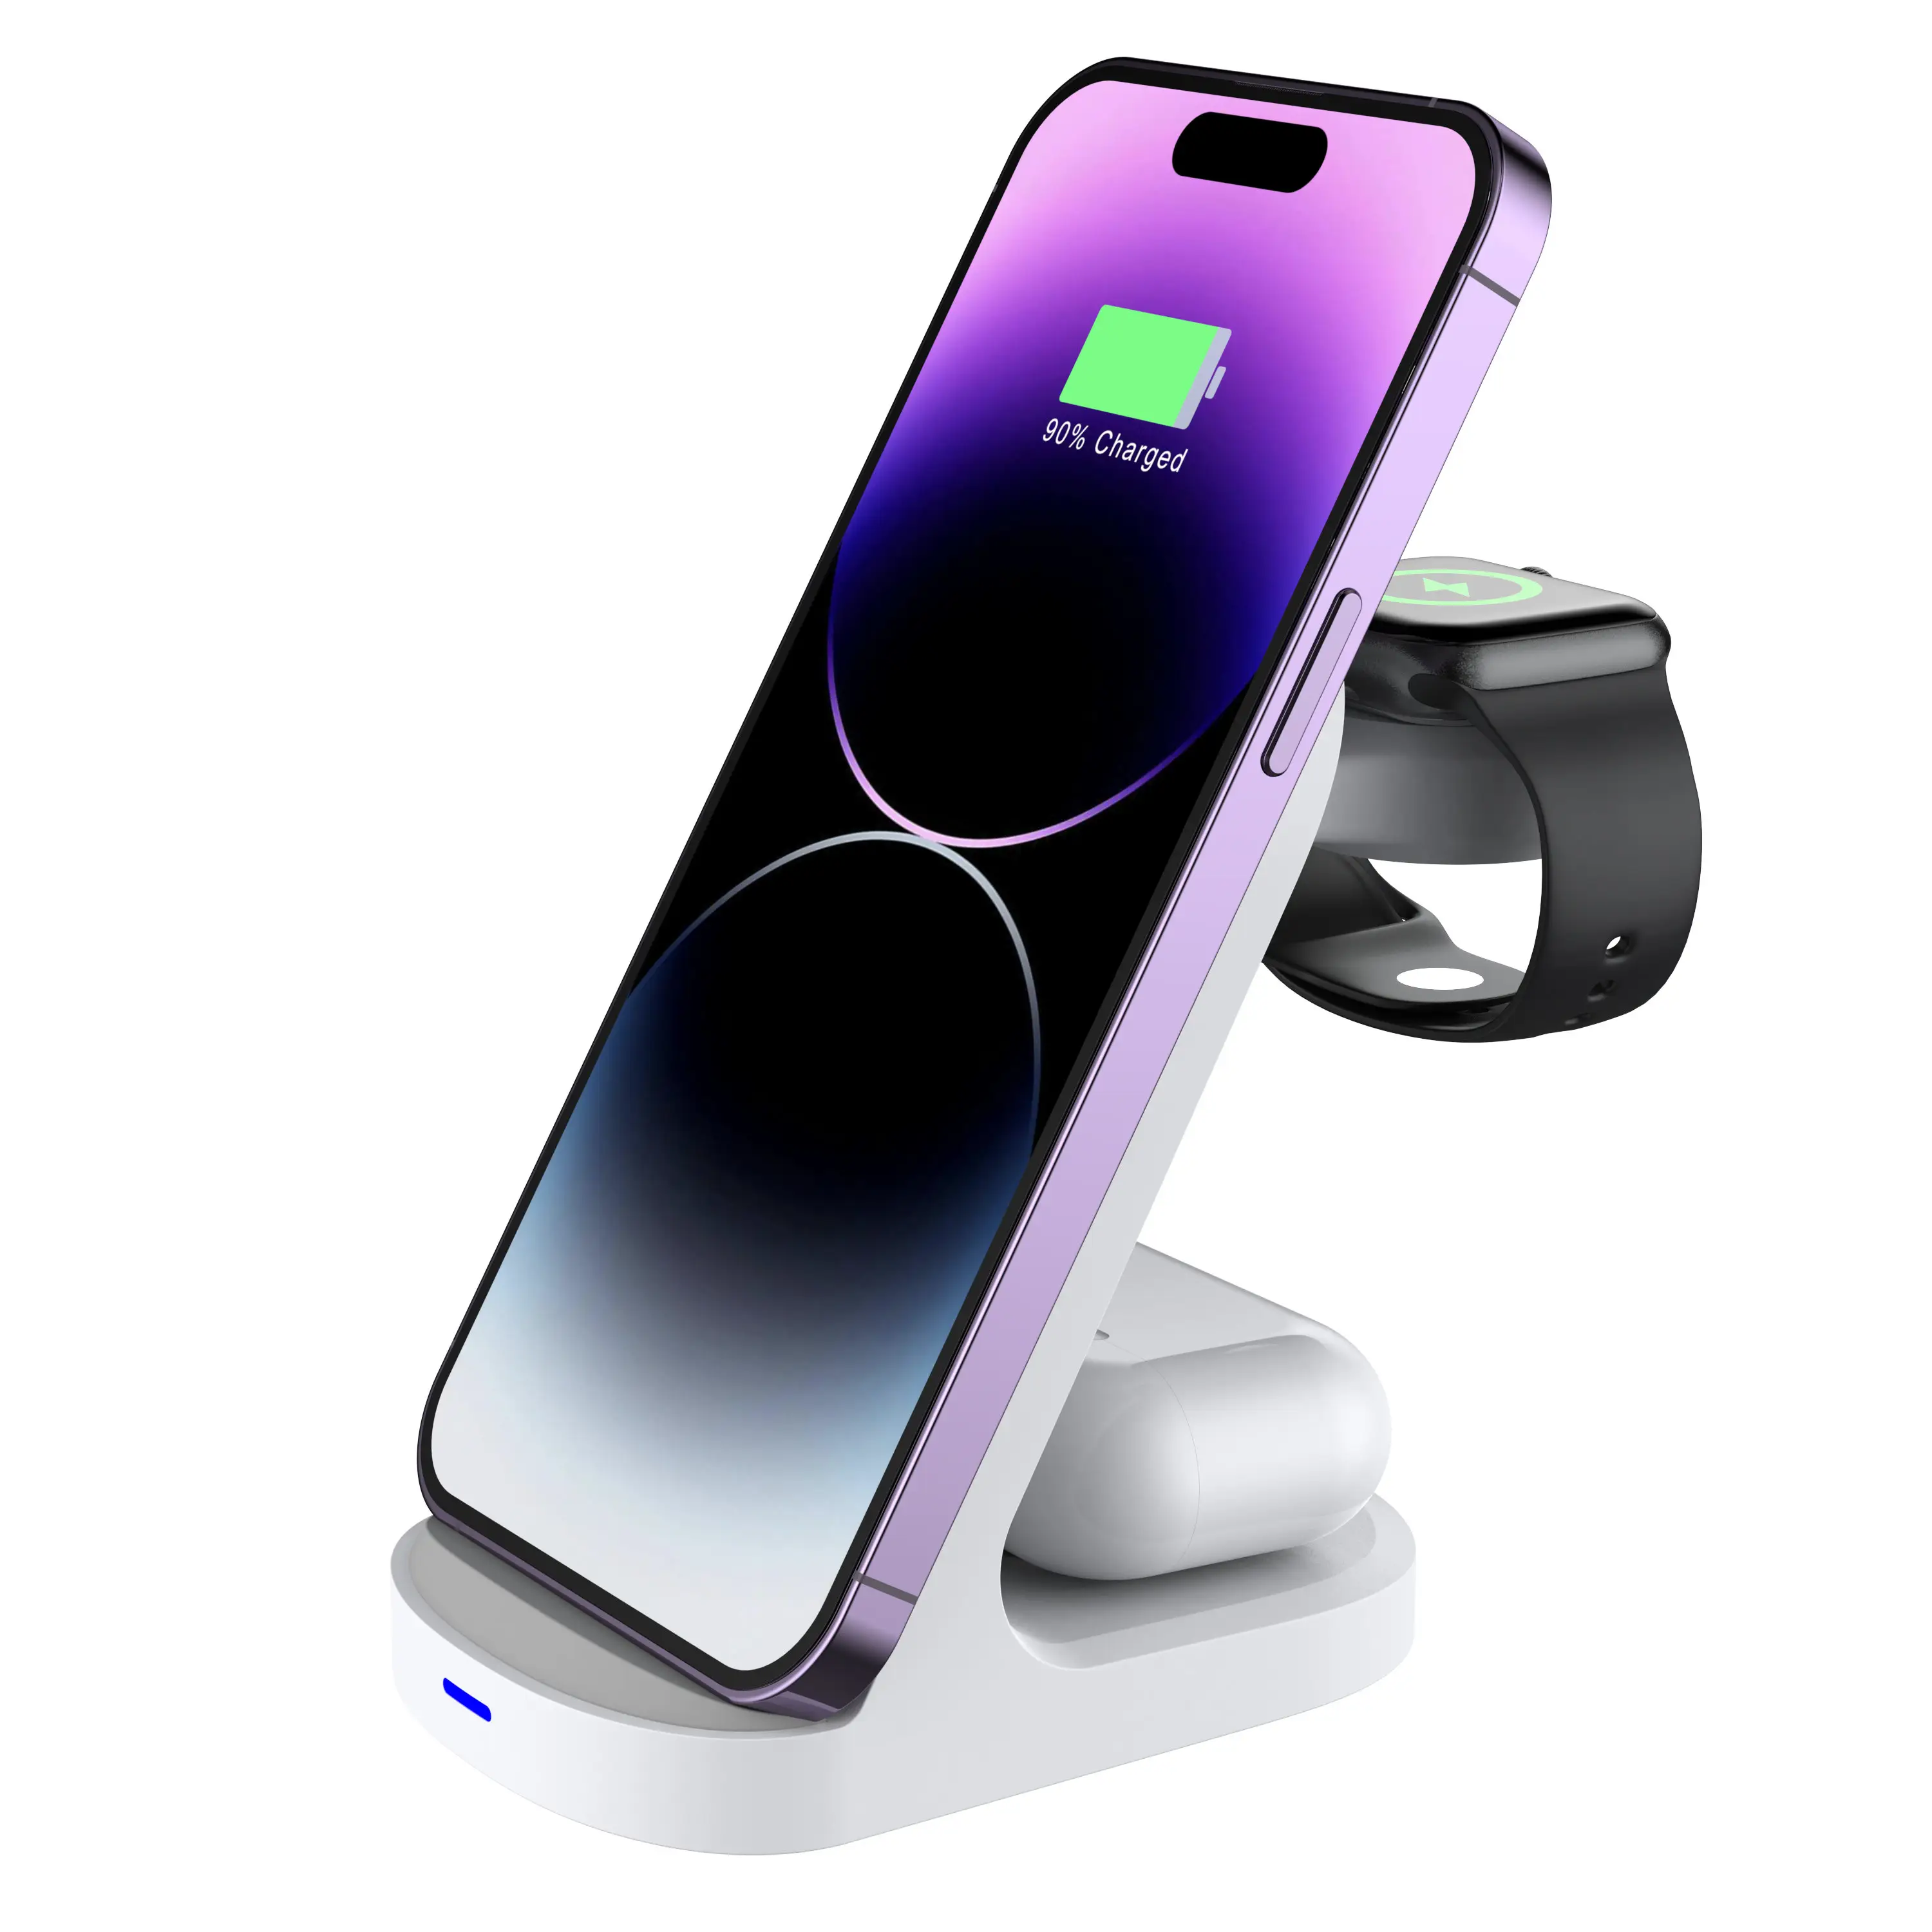 Multifunction Foldable 3 in 1 support qi fast charging mobile charger wireless Smart Watch charger Cell Phone Holder